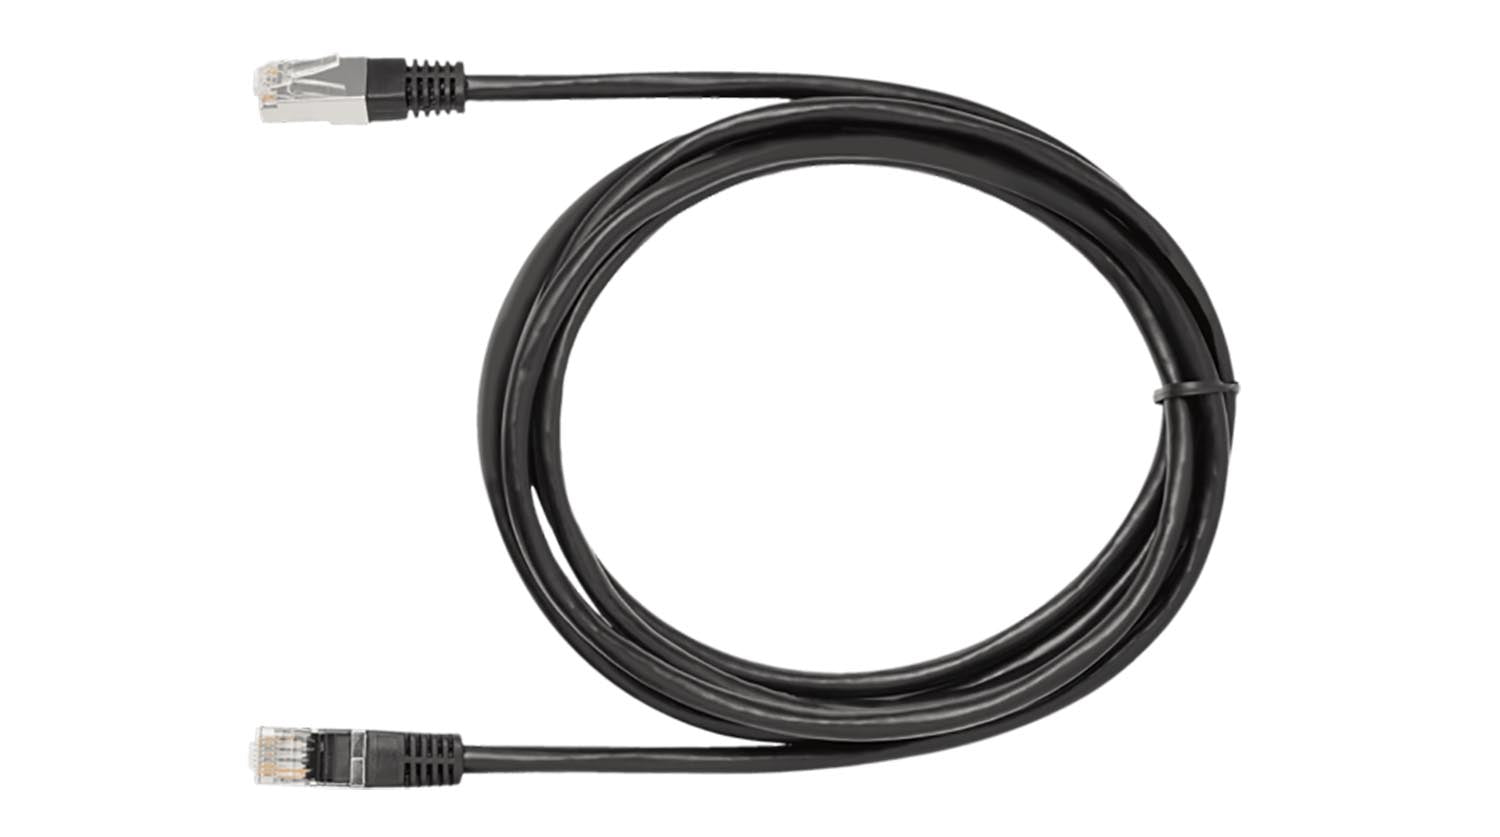 Shure EC 6001 Shielded Cat5e F/UTP Cable with Shielded RJ45 Connectors - Black - Hollywood DJ